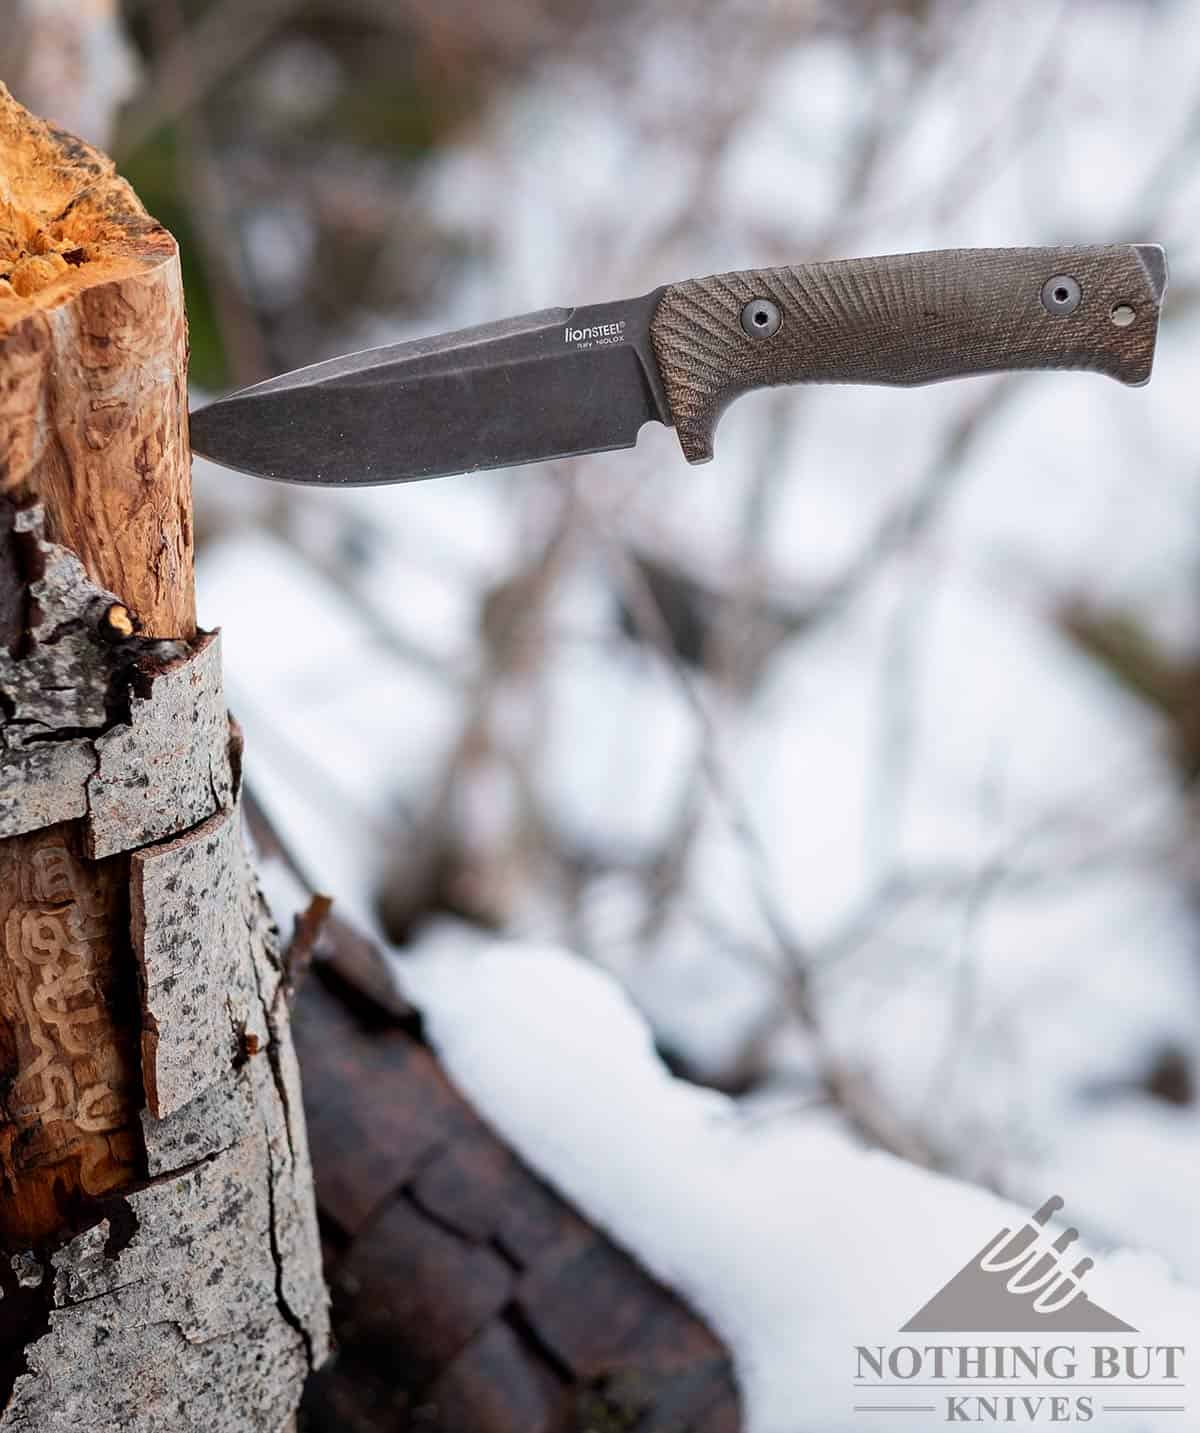 The Lionsteel T5 survival knife with a niolox steel blade and micarta handle sticking out of a tree stump. 